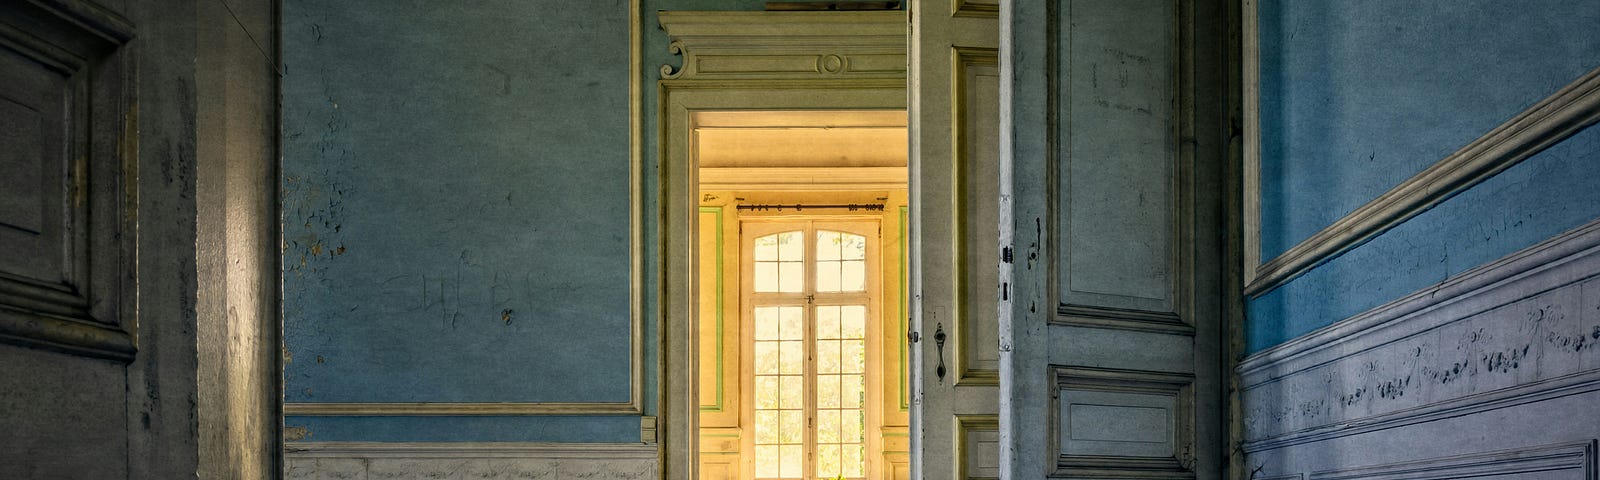 A beautiful old abandoned house, sunlight shining through a window at the end of a gray series of open doors.